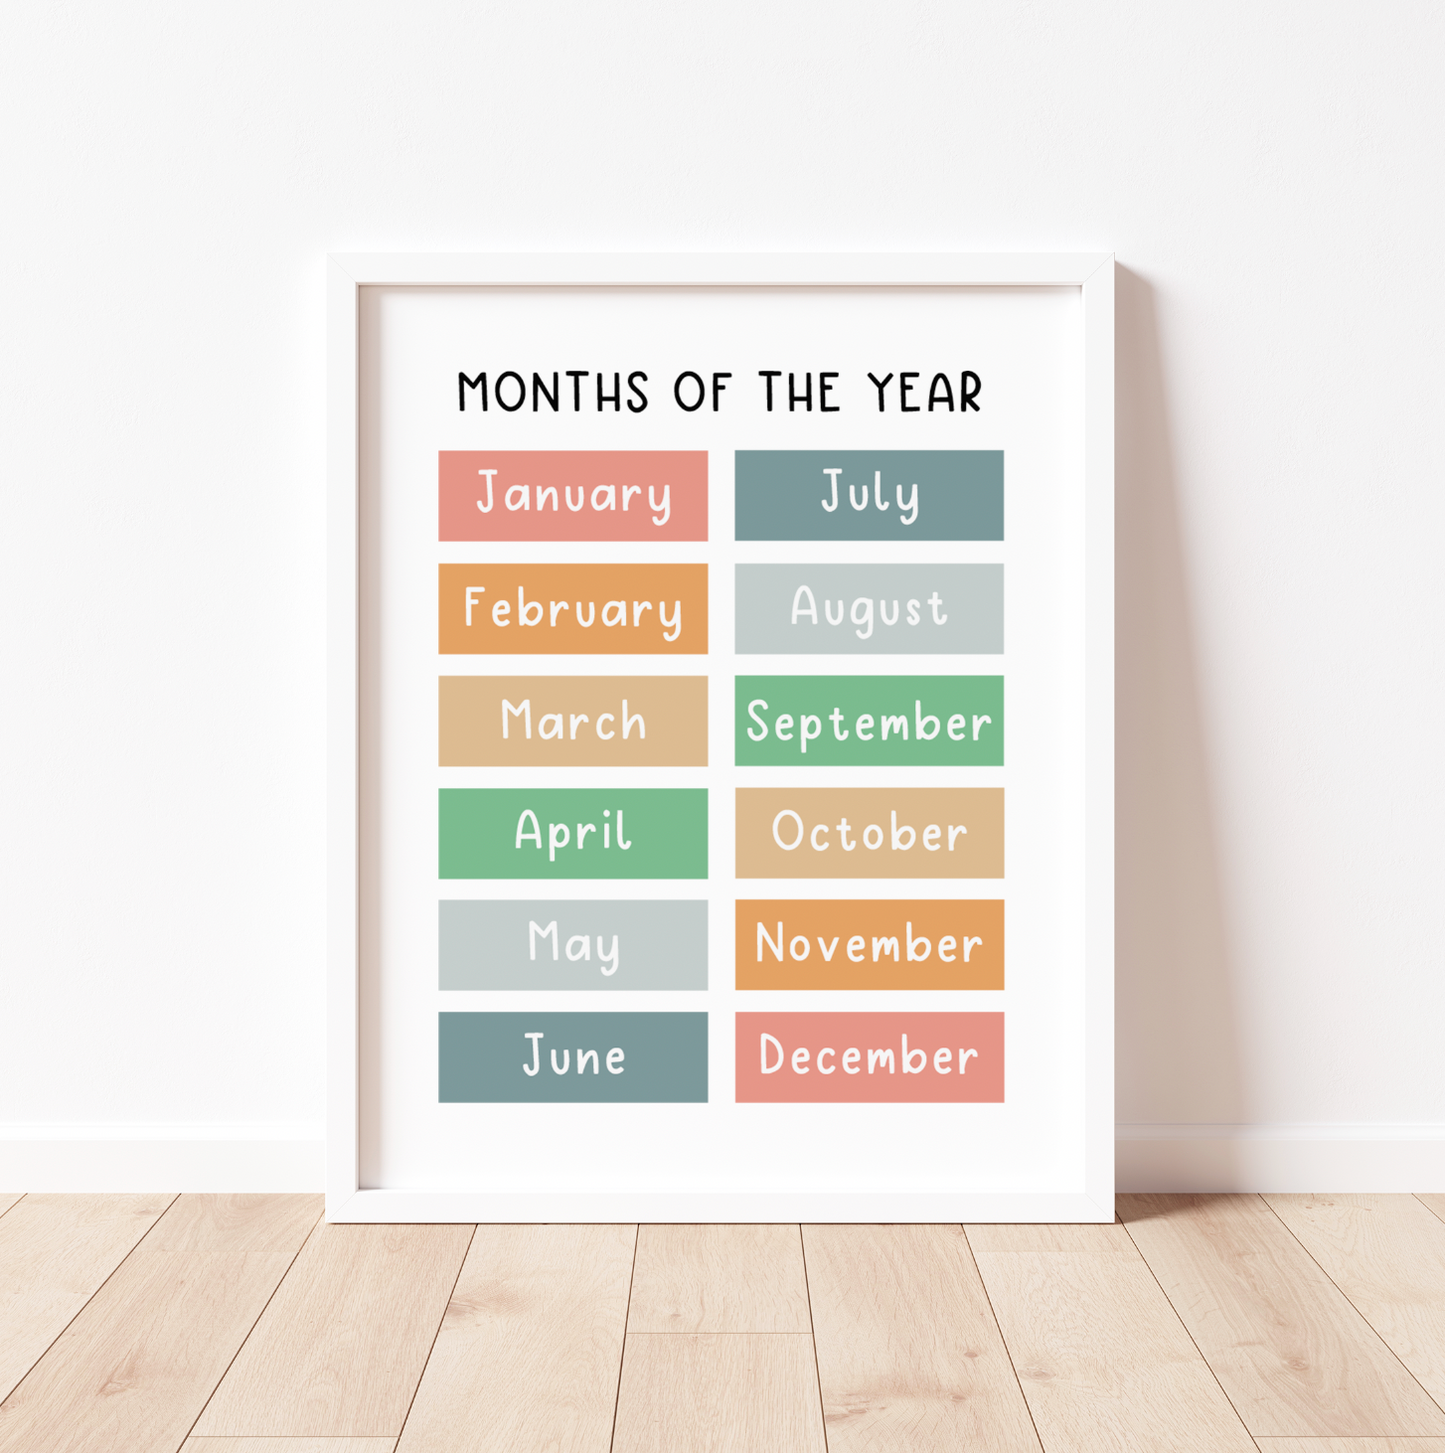 MONTHS OF THE YEAR - Educational Print